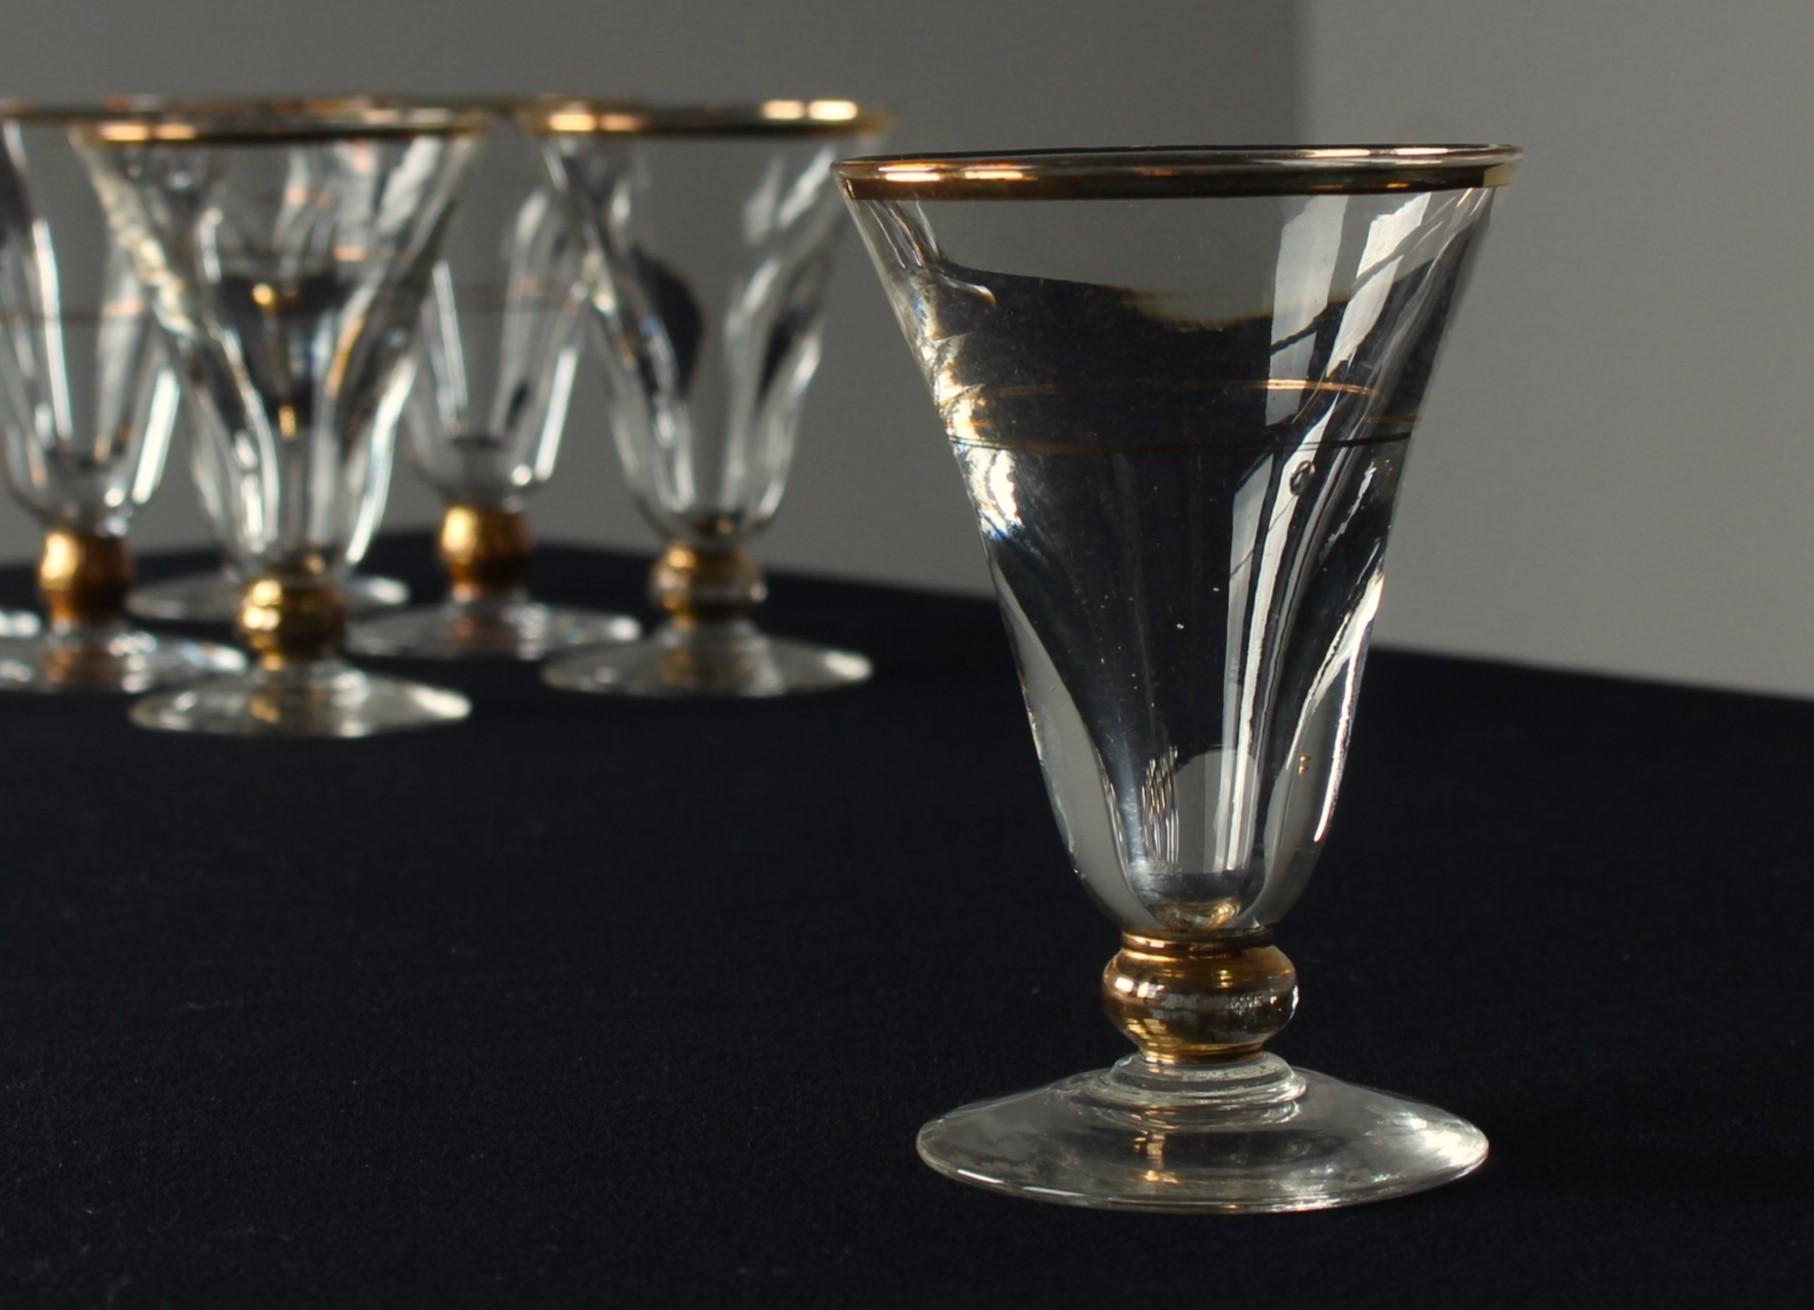 9 Art Nouveau Aperitif Glasses, 1900s, France, Crystal Glass With Gold Decor In Good Condition For Sale In Greven, DE